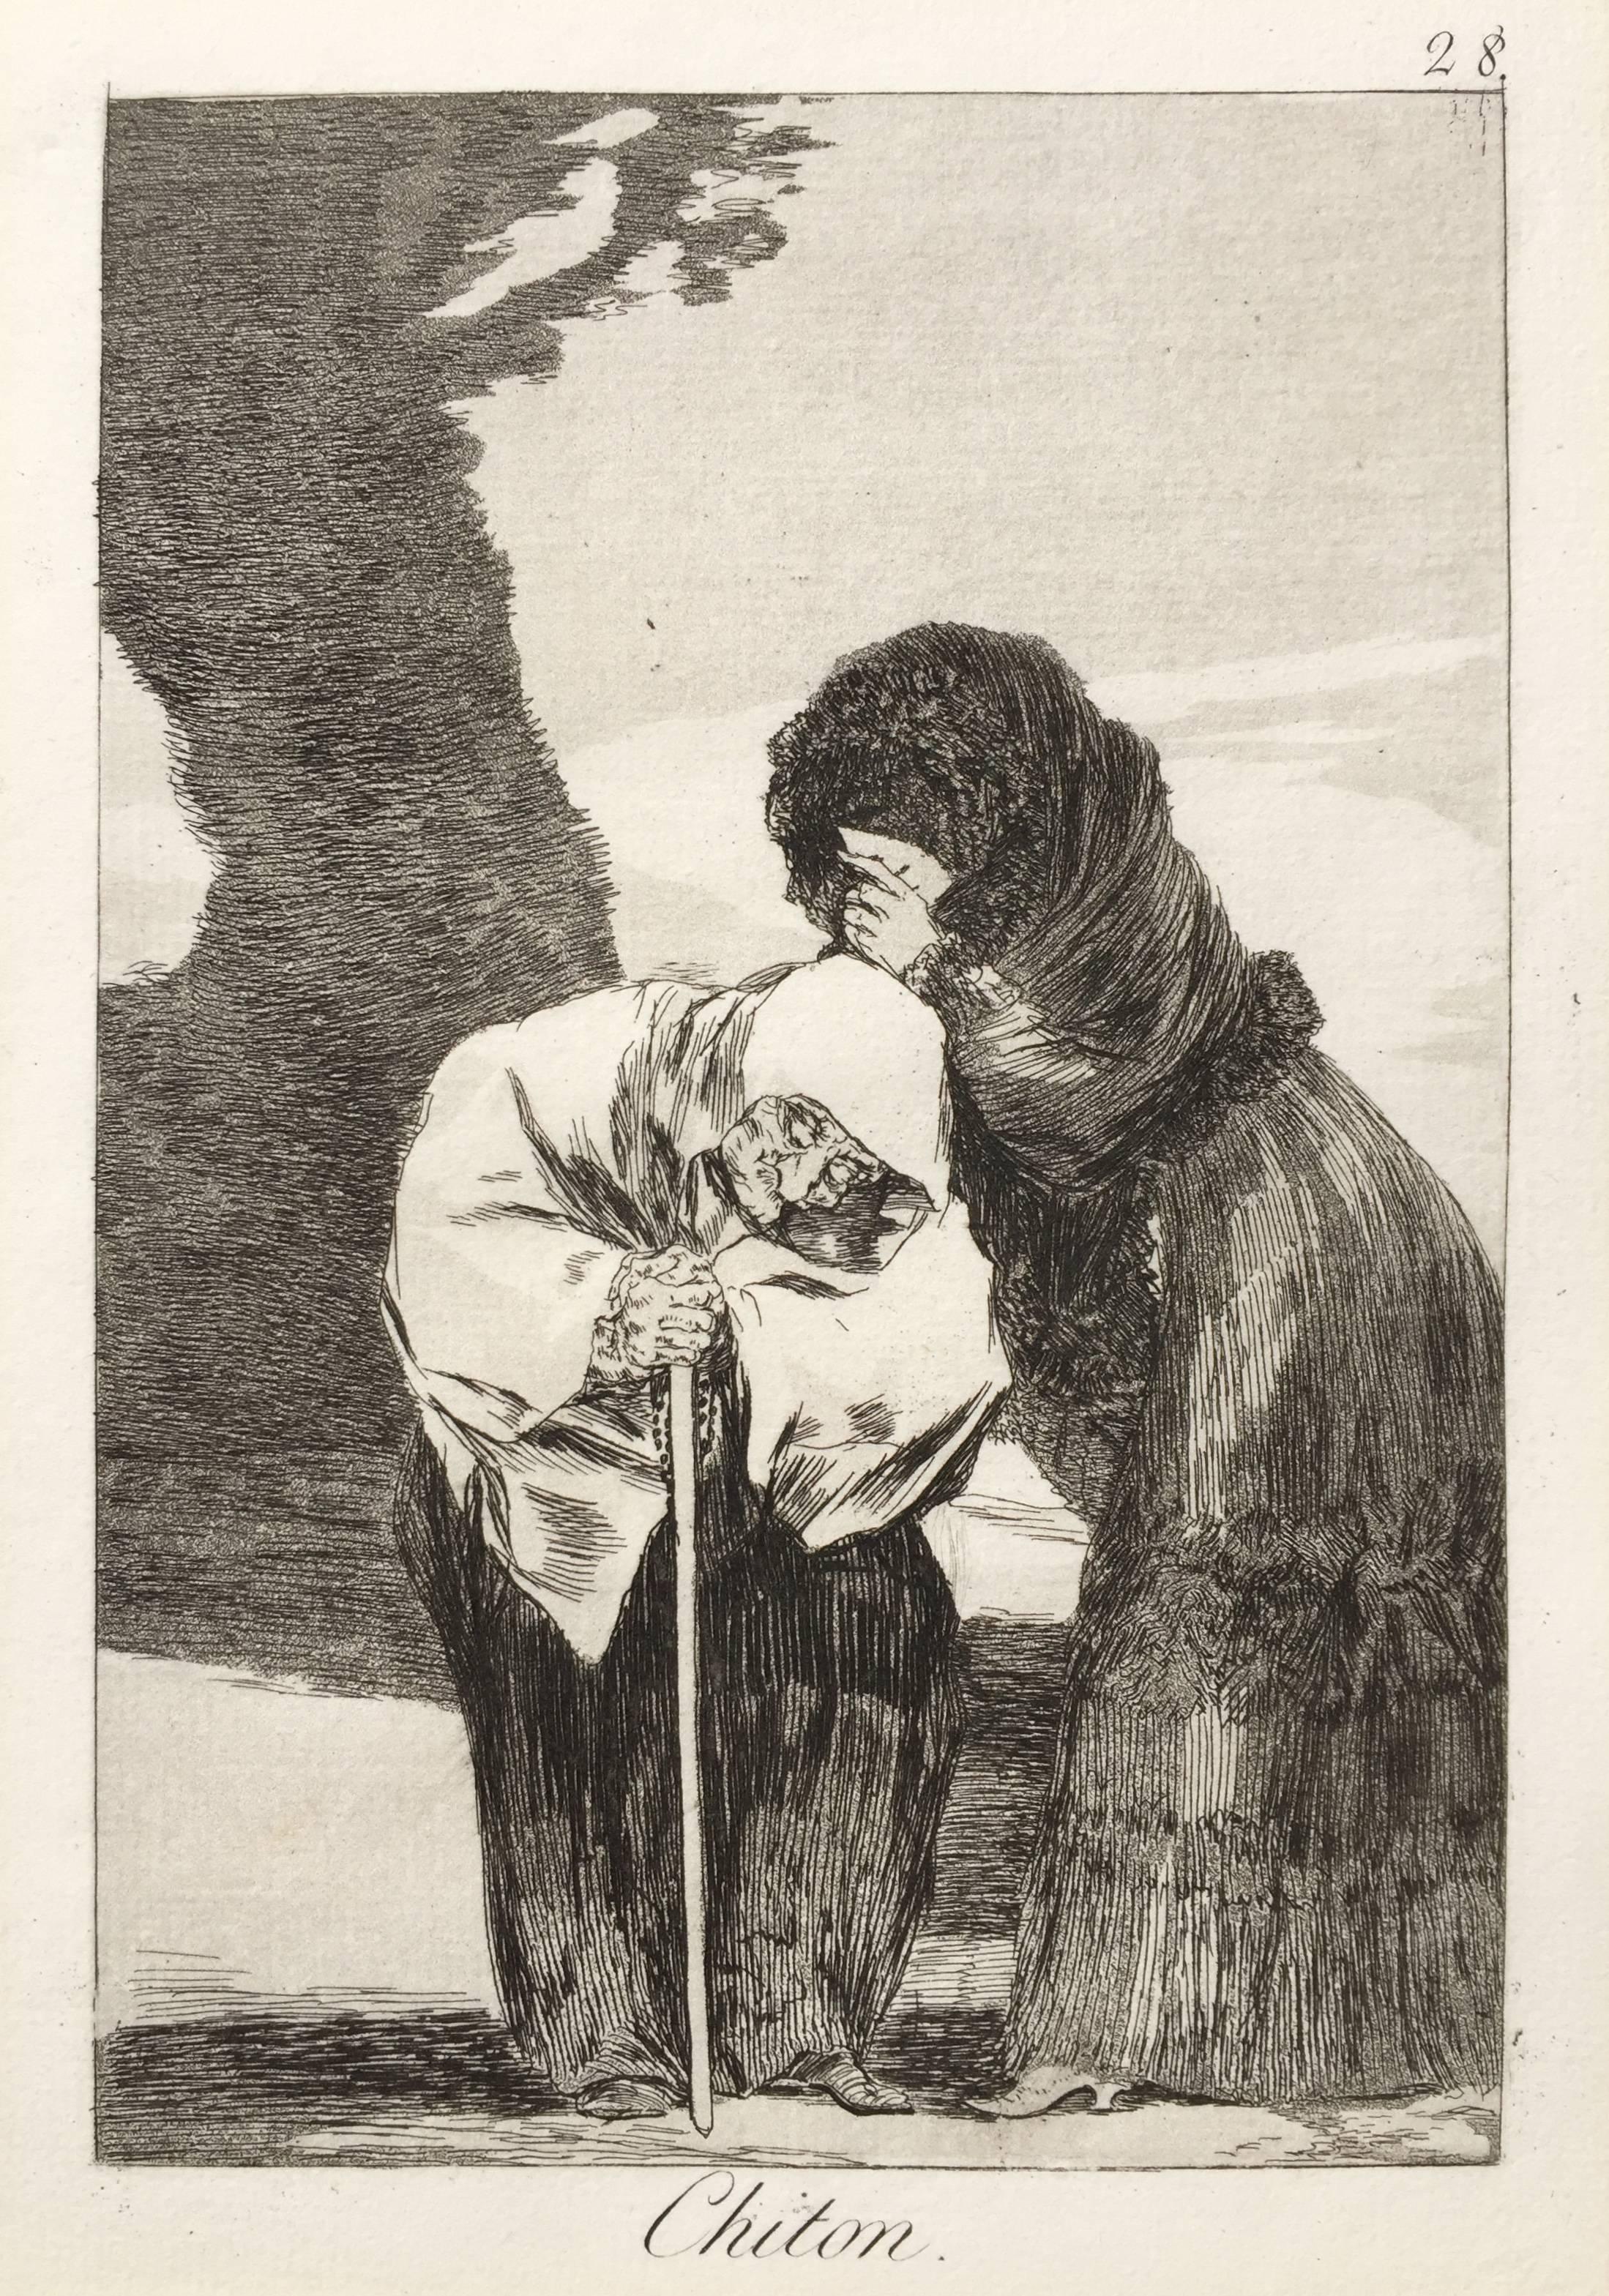 Francisco Goya Figurative Print – Chiton -  “An Excellent Woman to Trust with a Confidential"